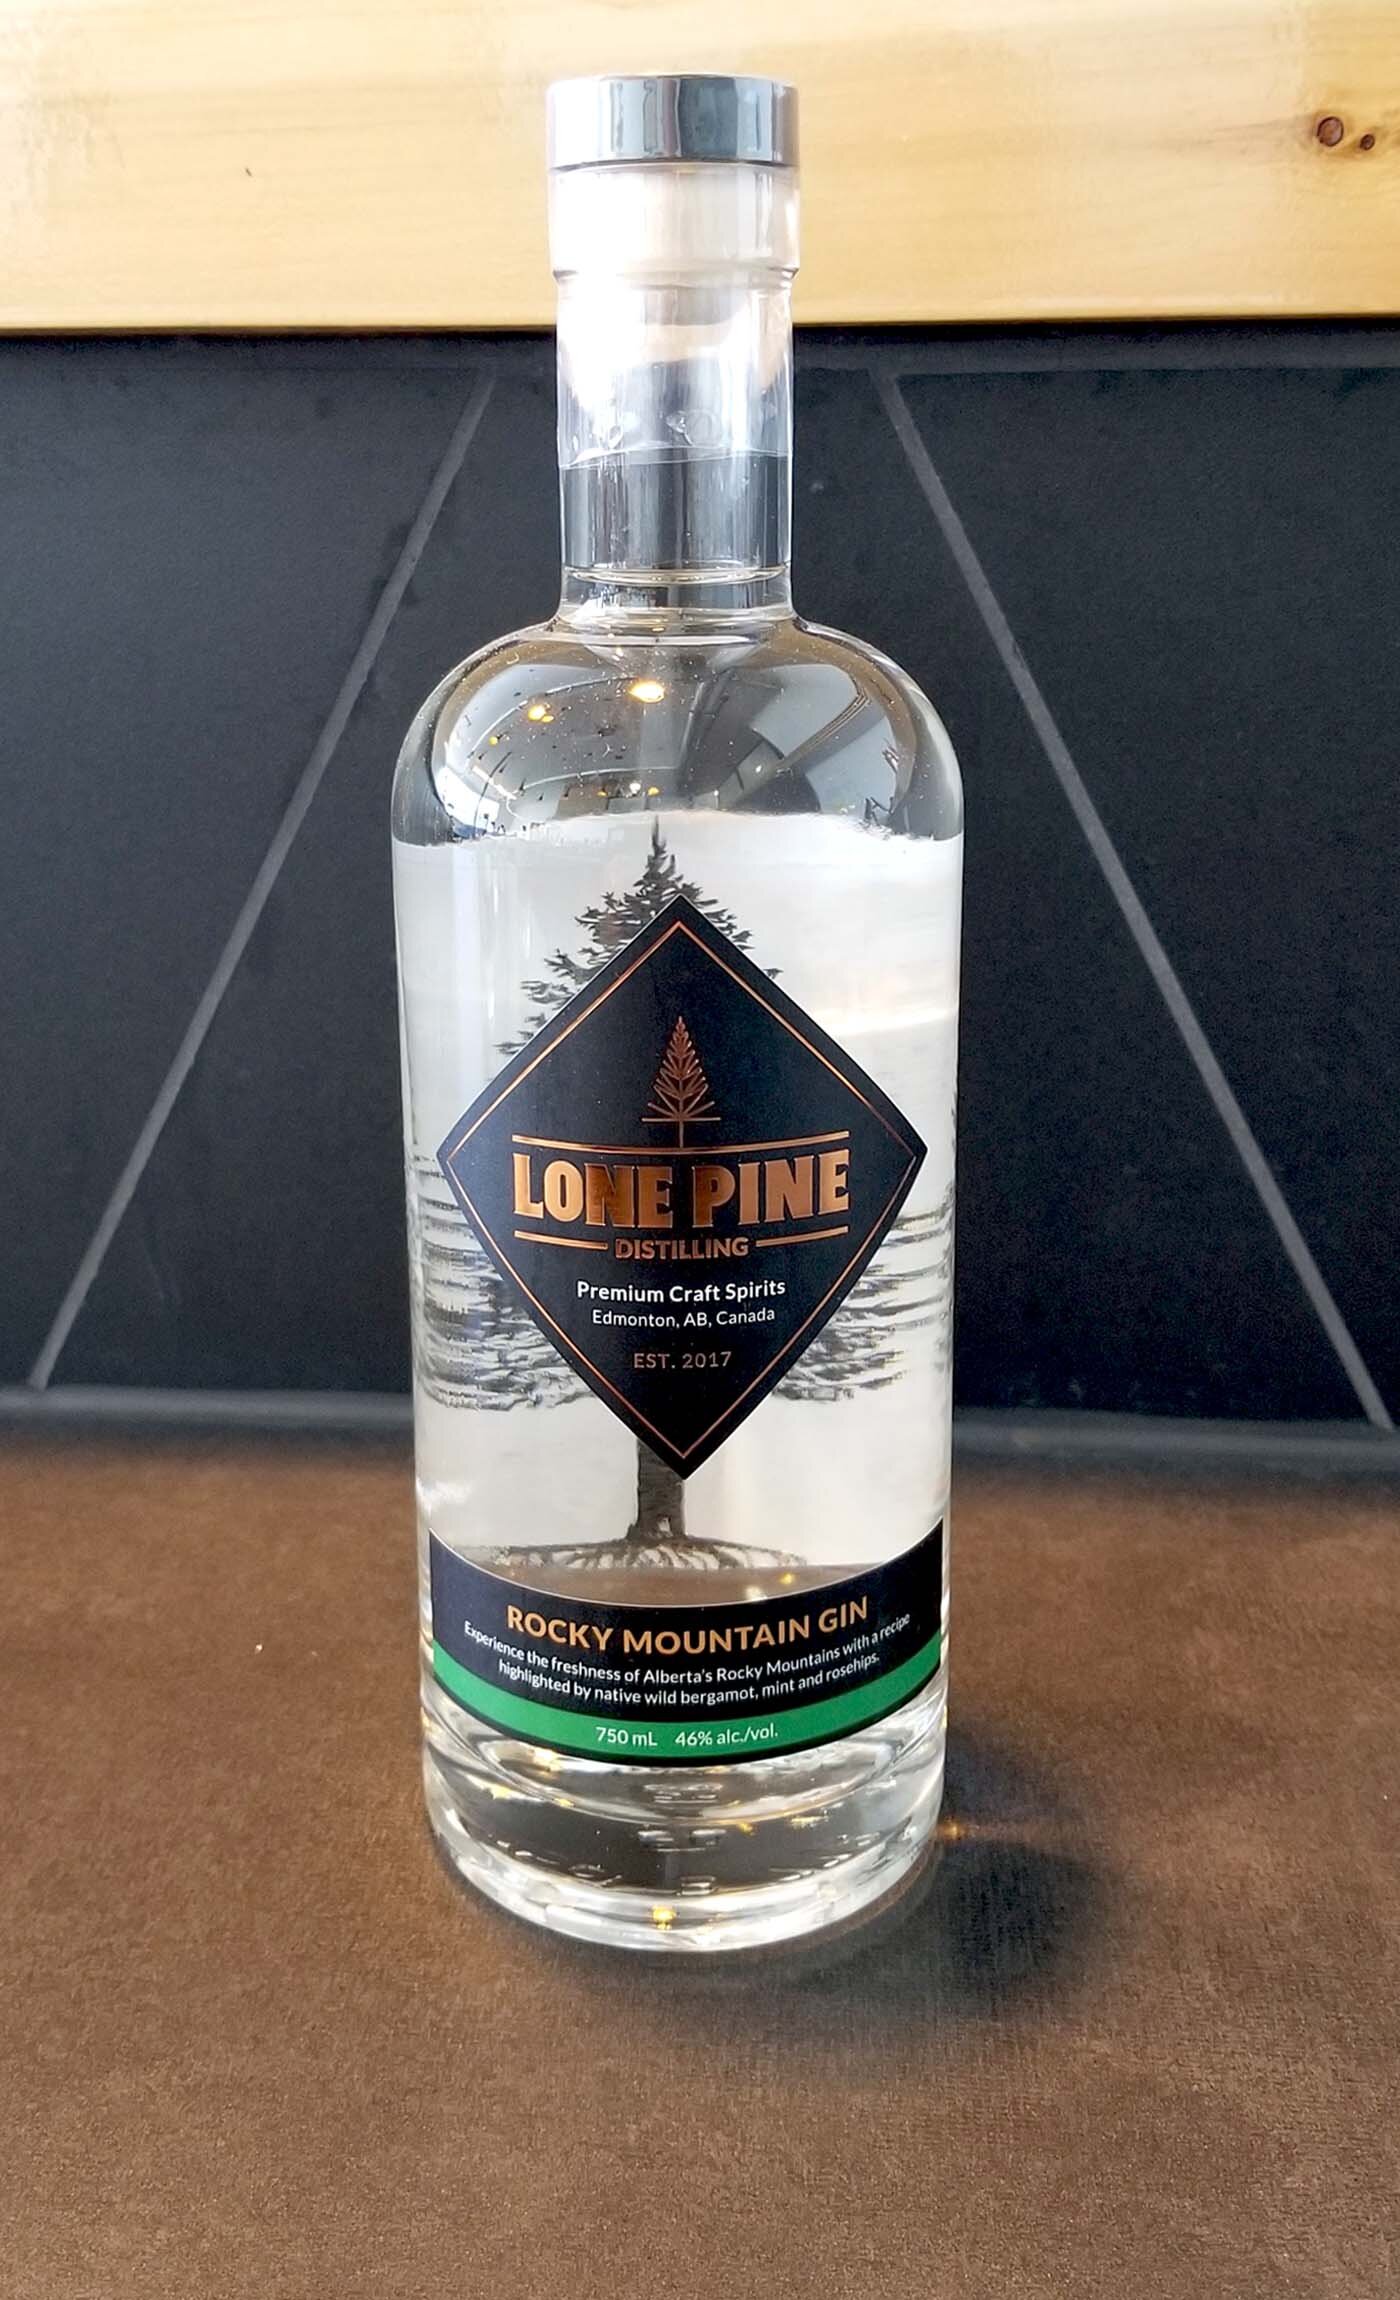 Image courtesy of lone pine distilling.